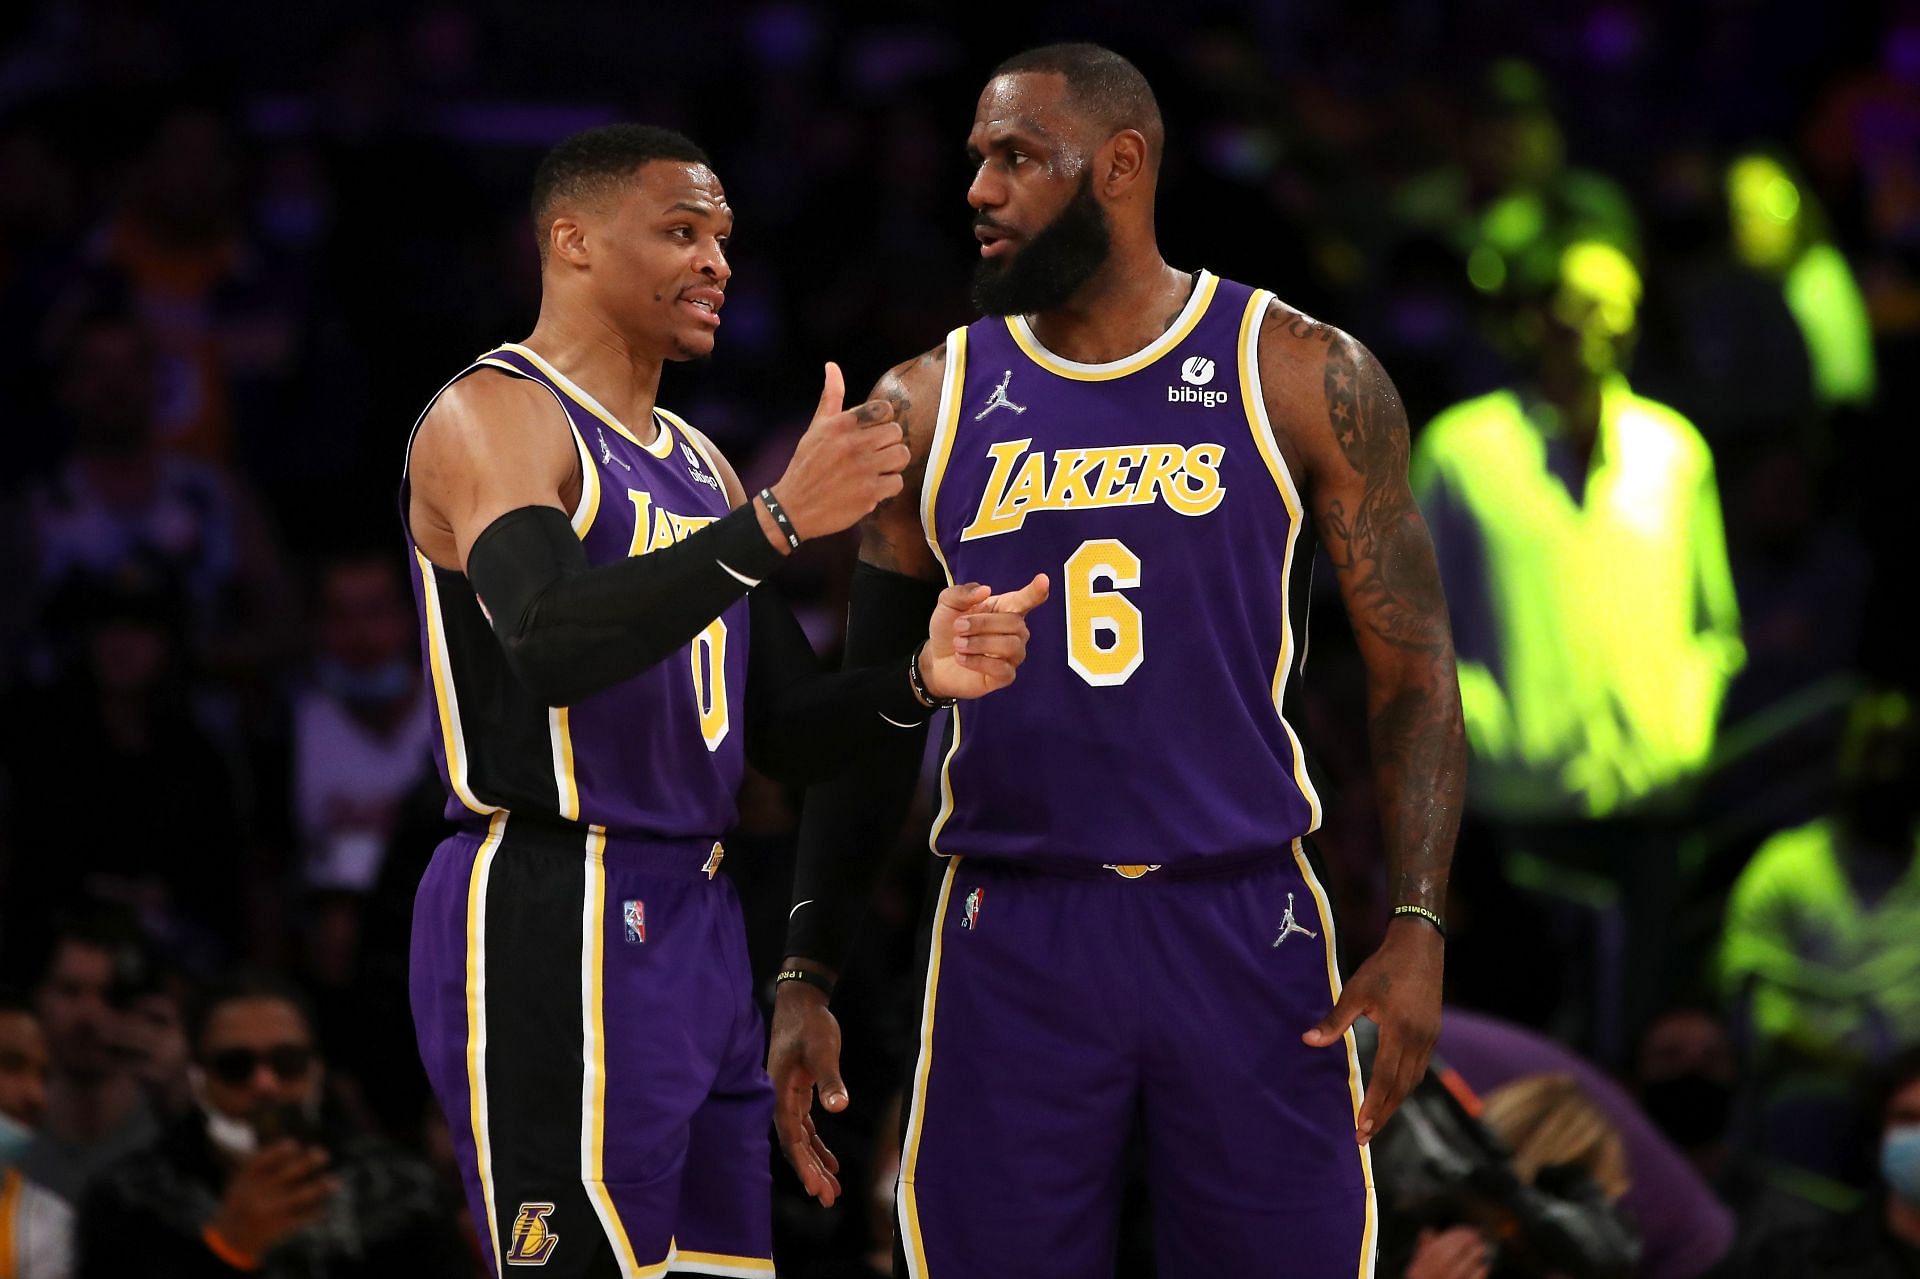 Westbrook and James will have huge roles to play if the Lakers are to go beyond the first round